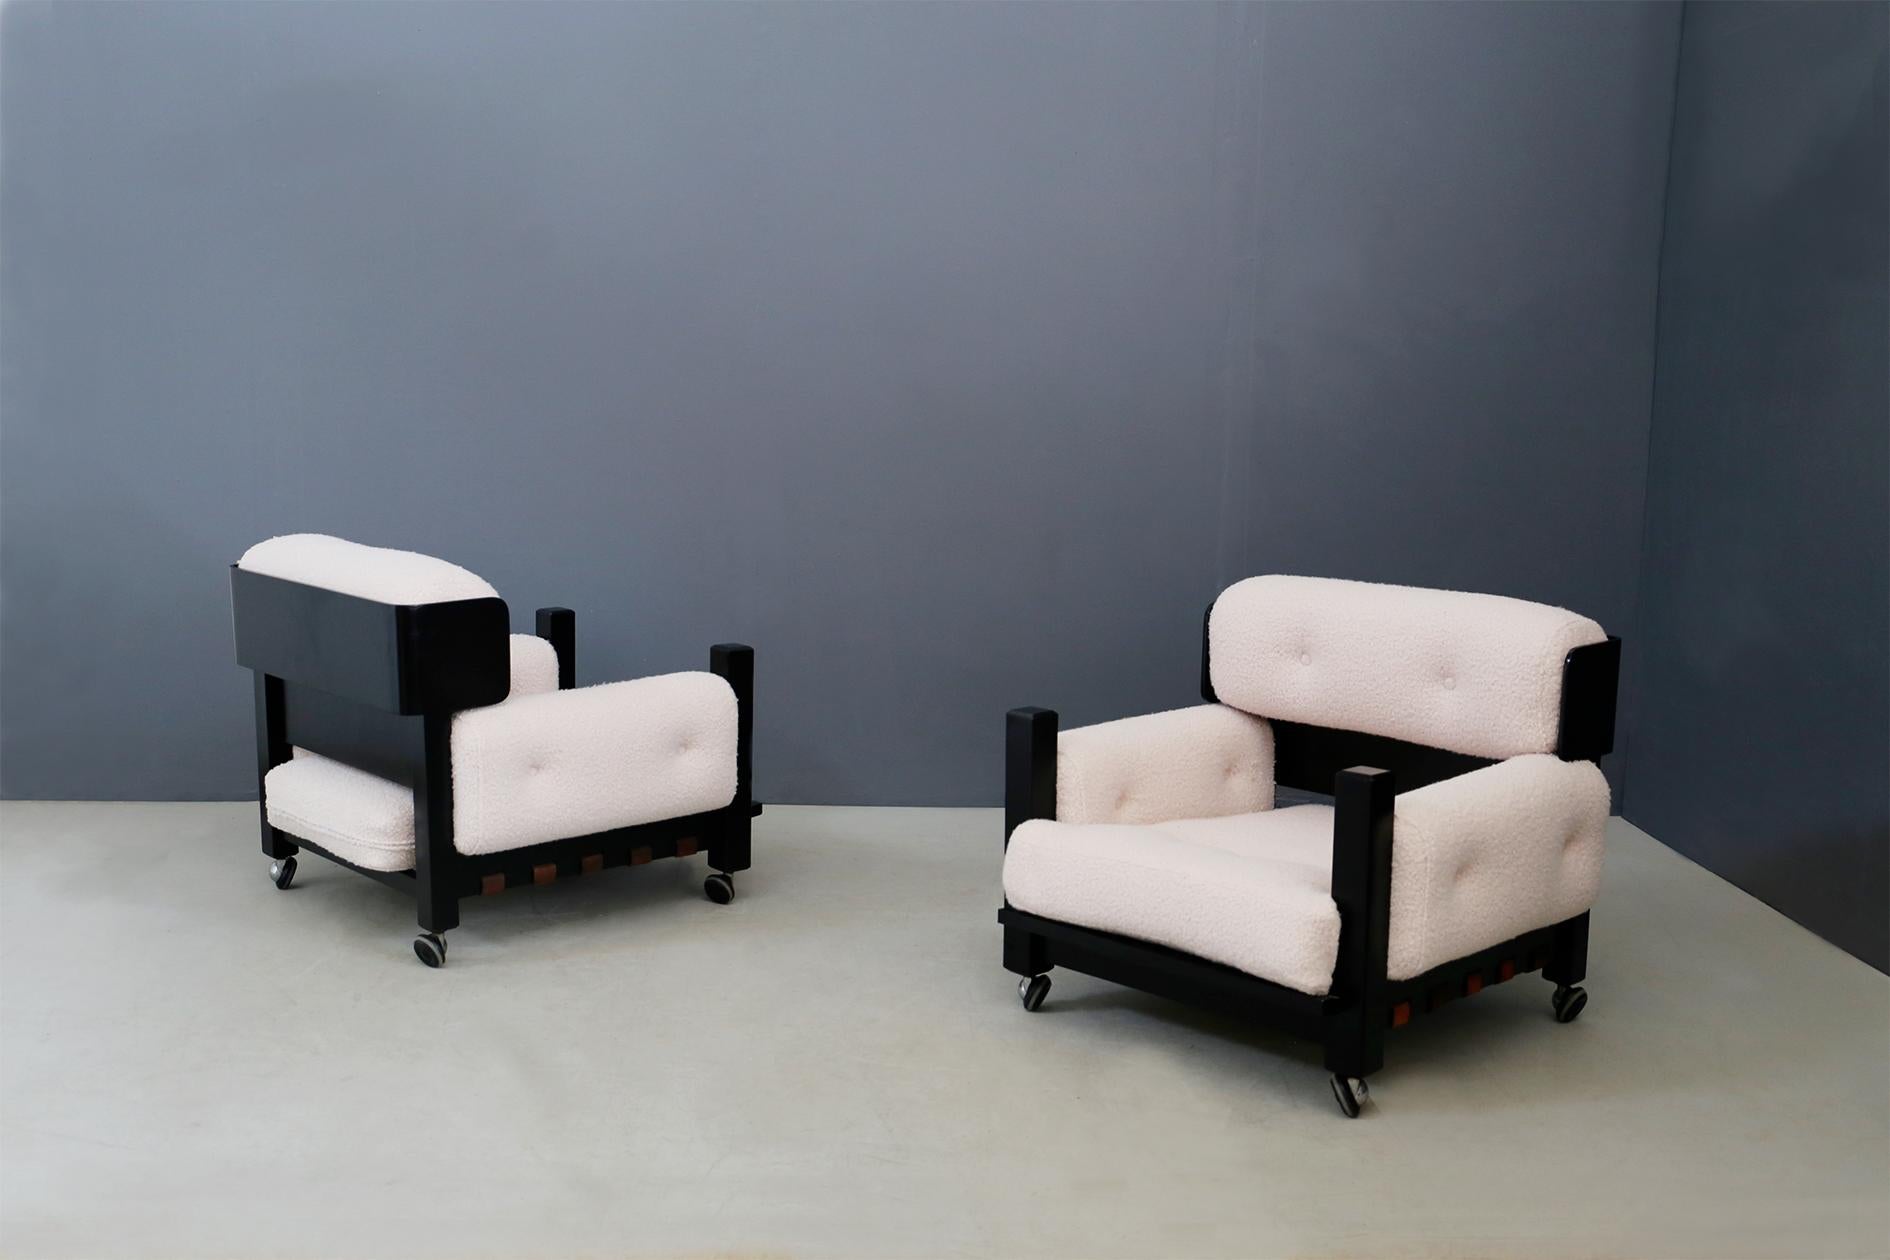 Geometric pair of Italian armchairs from 1960s. The structure of the armchairs is in restored ebonized wood, the seat and backrest cushions are in re-covered white
bouclé fabric.
The peculiarity of the seat is its hand rest made of ebonized wood